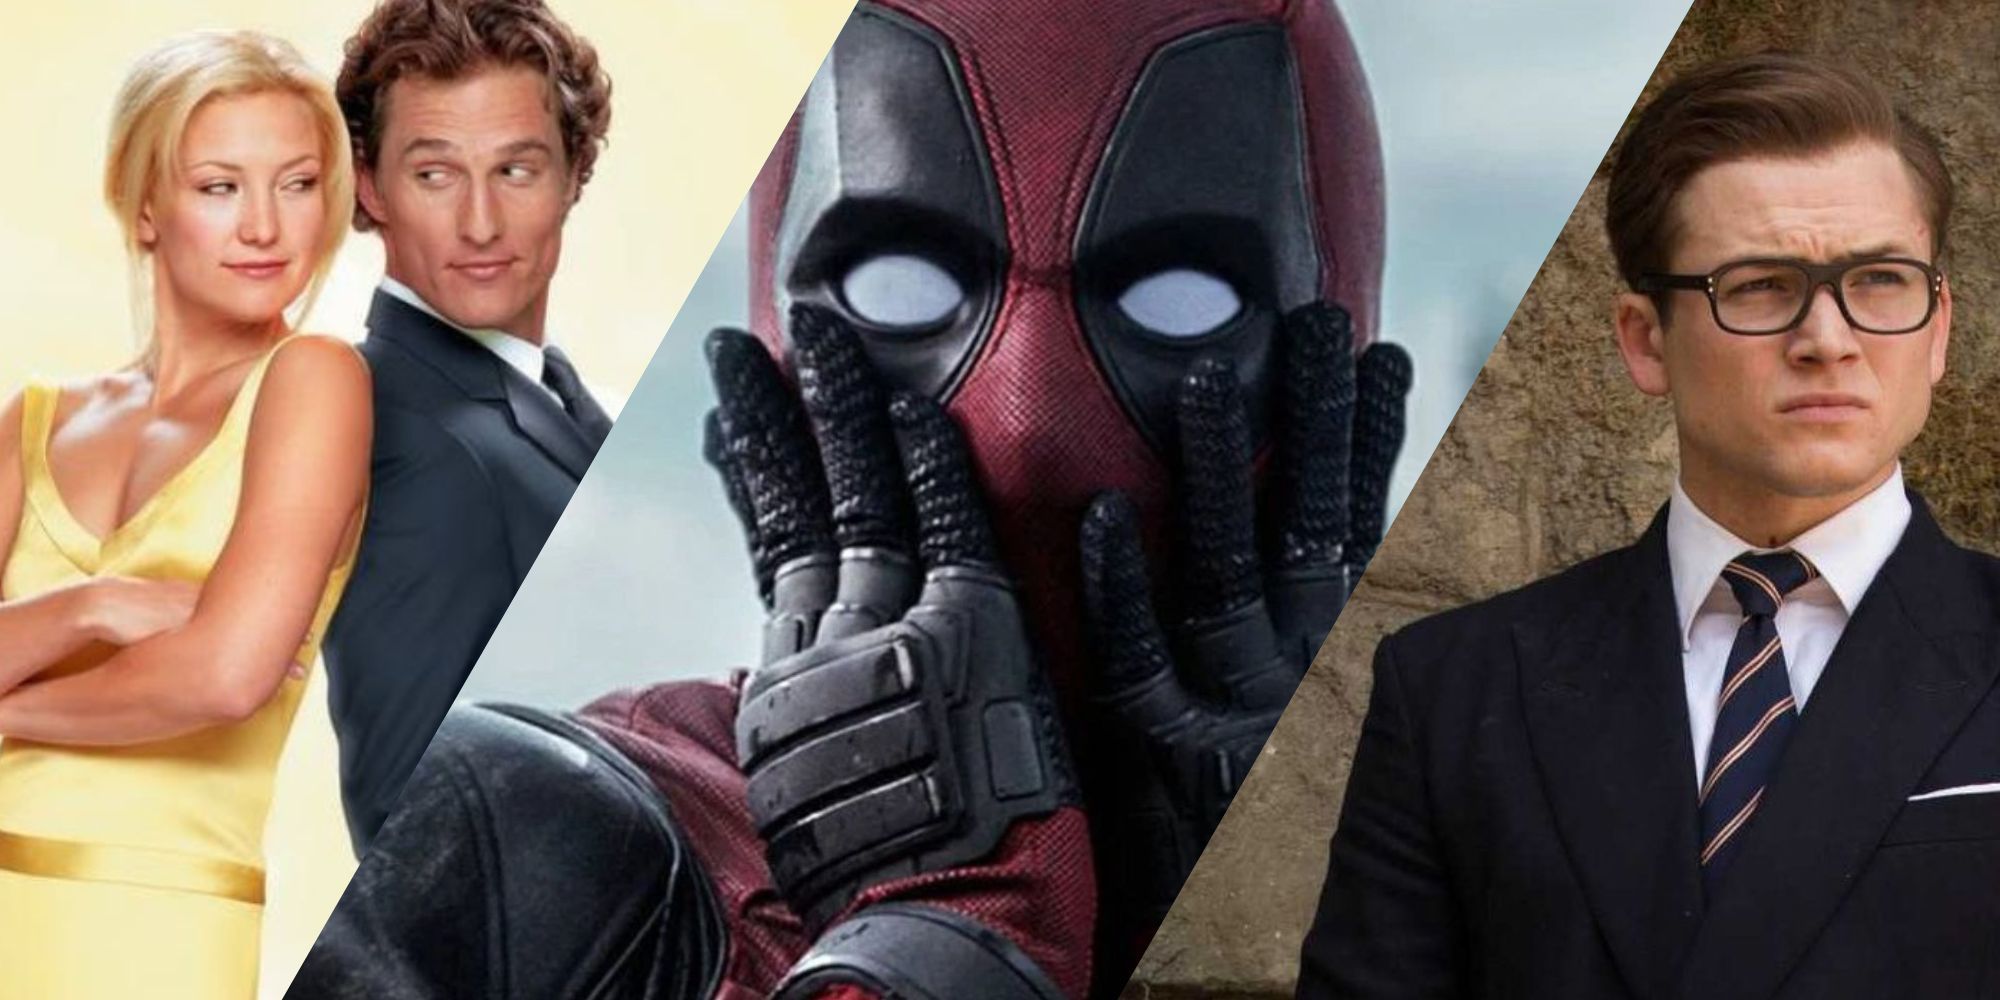 How to Lose a Guy in 10 Days, Deadpool, Kingsman: The Secret Service